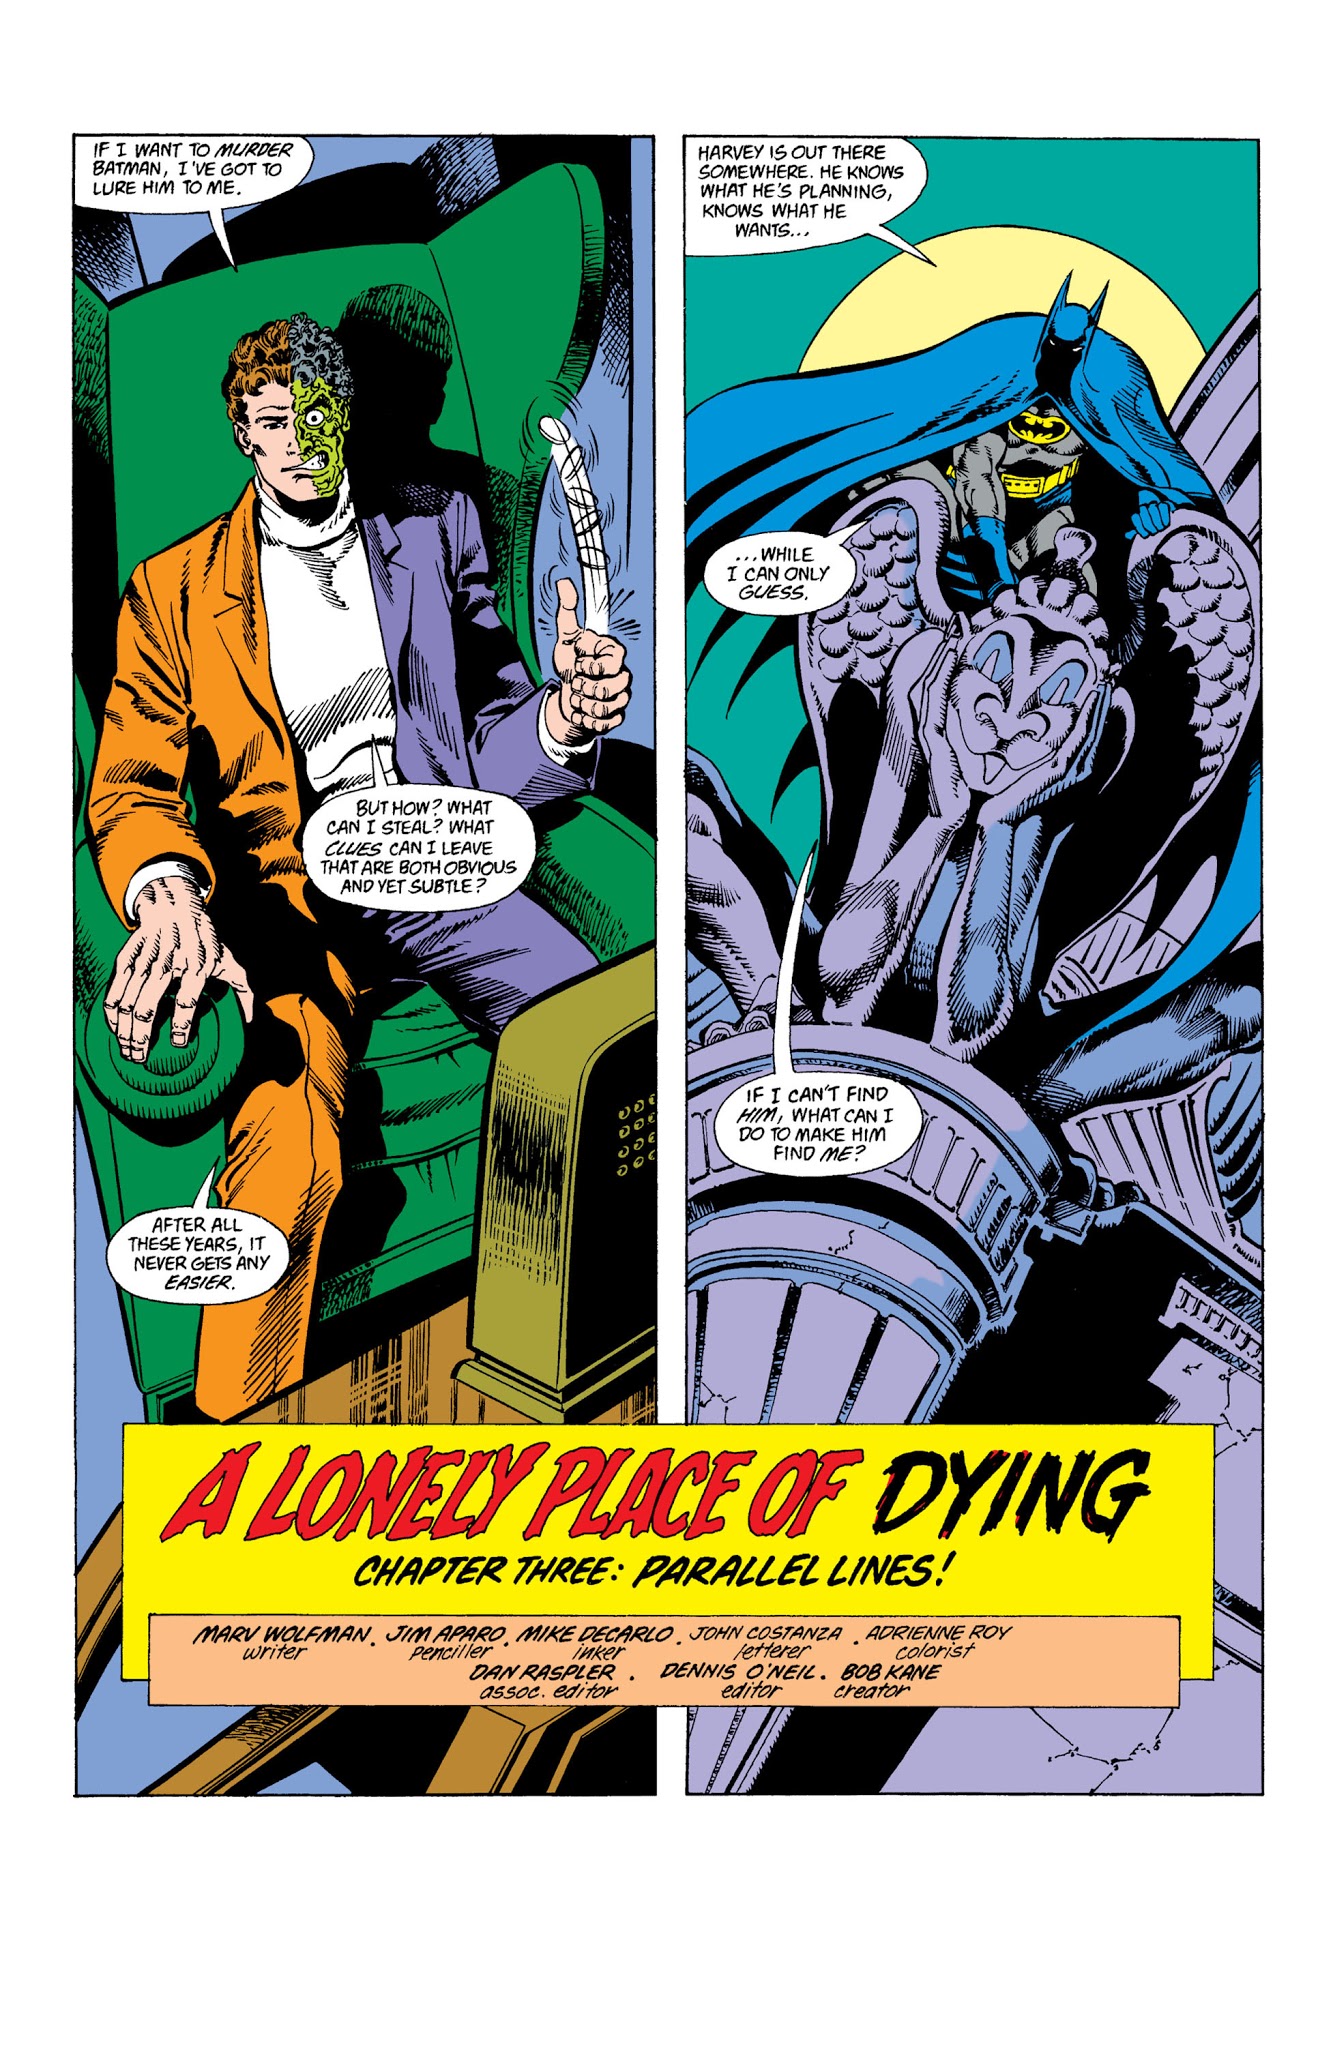 Read online Batman: A Lonely Place of Dying comic -  Issue # TPB - 25